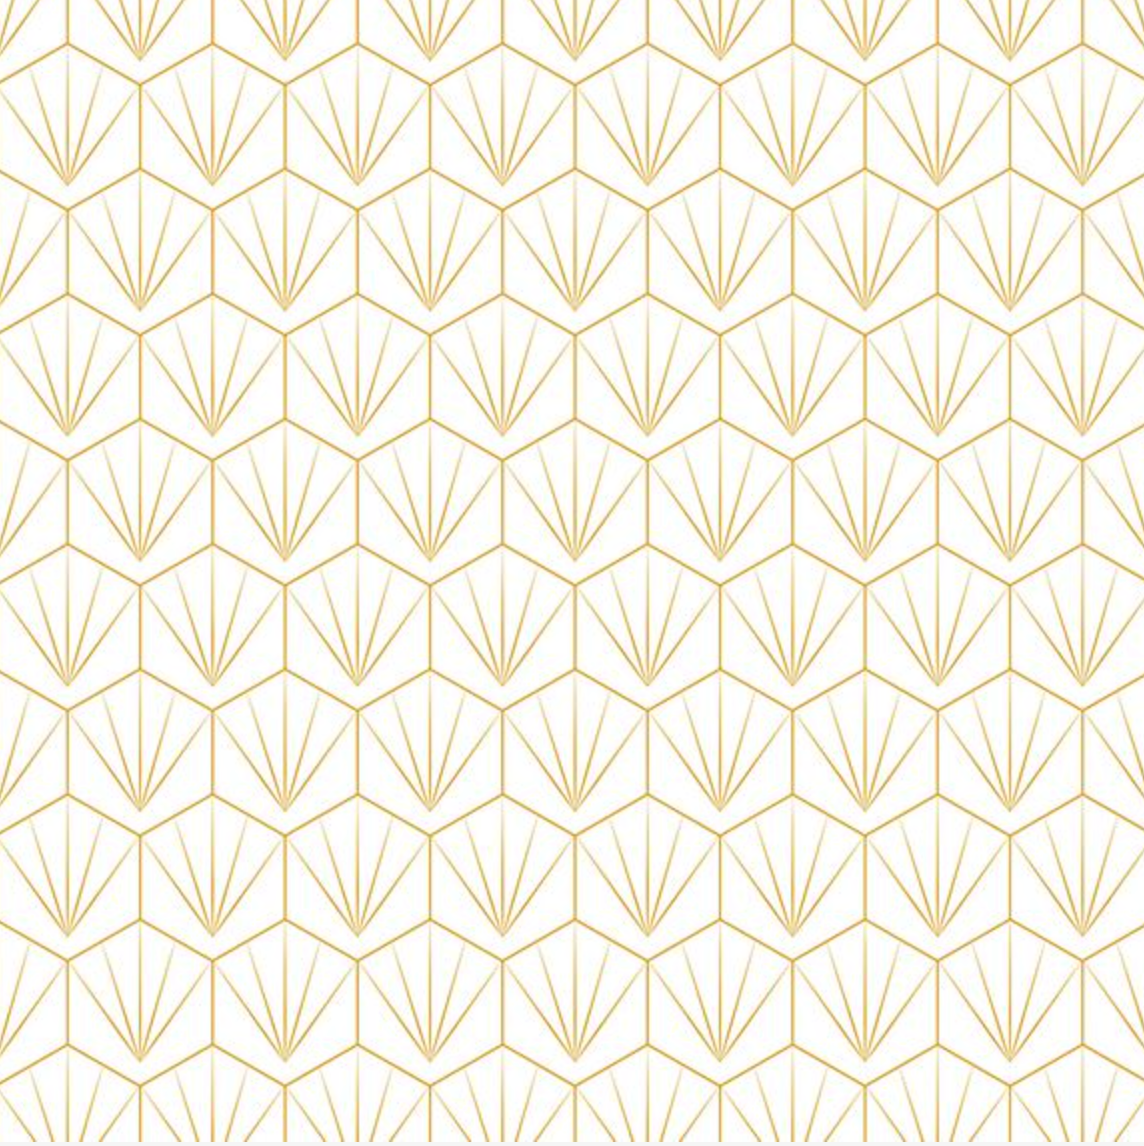 Showerwall Acrylic Patterns & Tiles Collection - Deco Tile White/Mustard